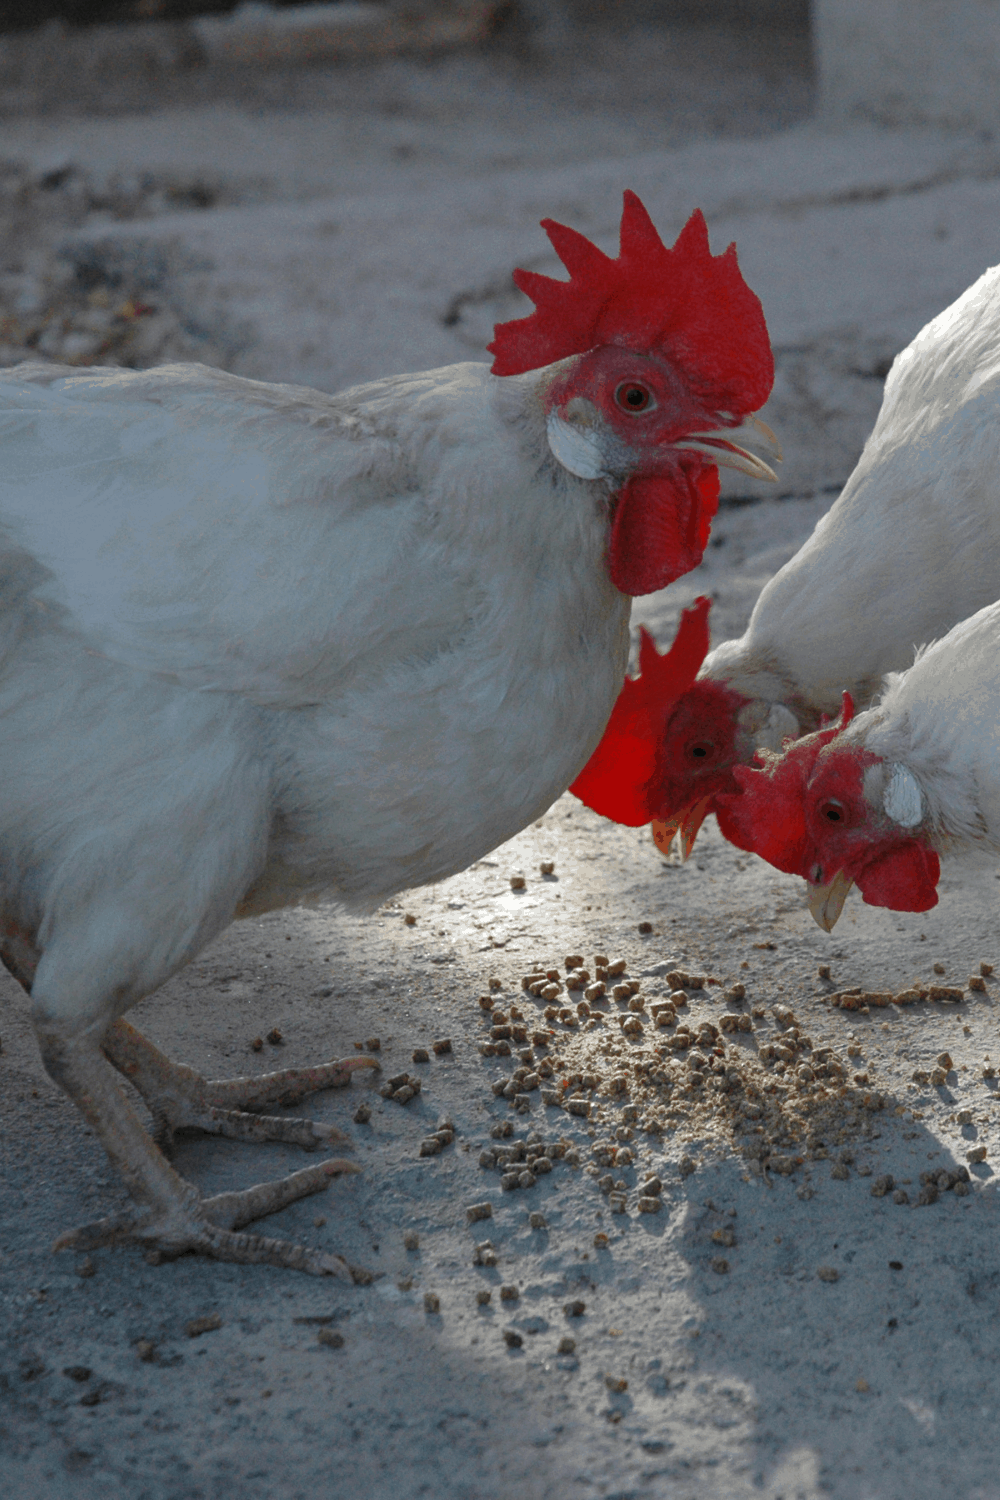 Can Chickens Eat Mayonnaise?